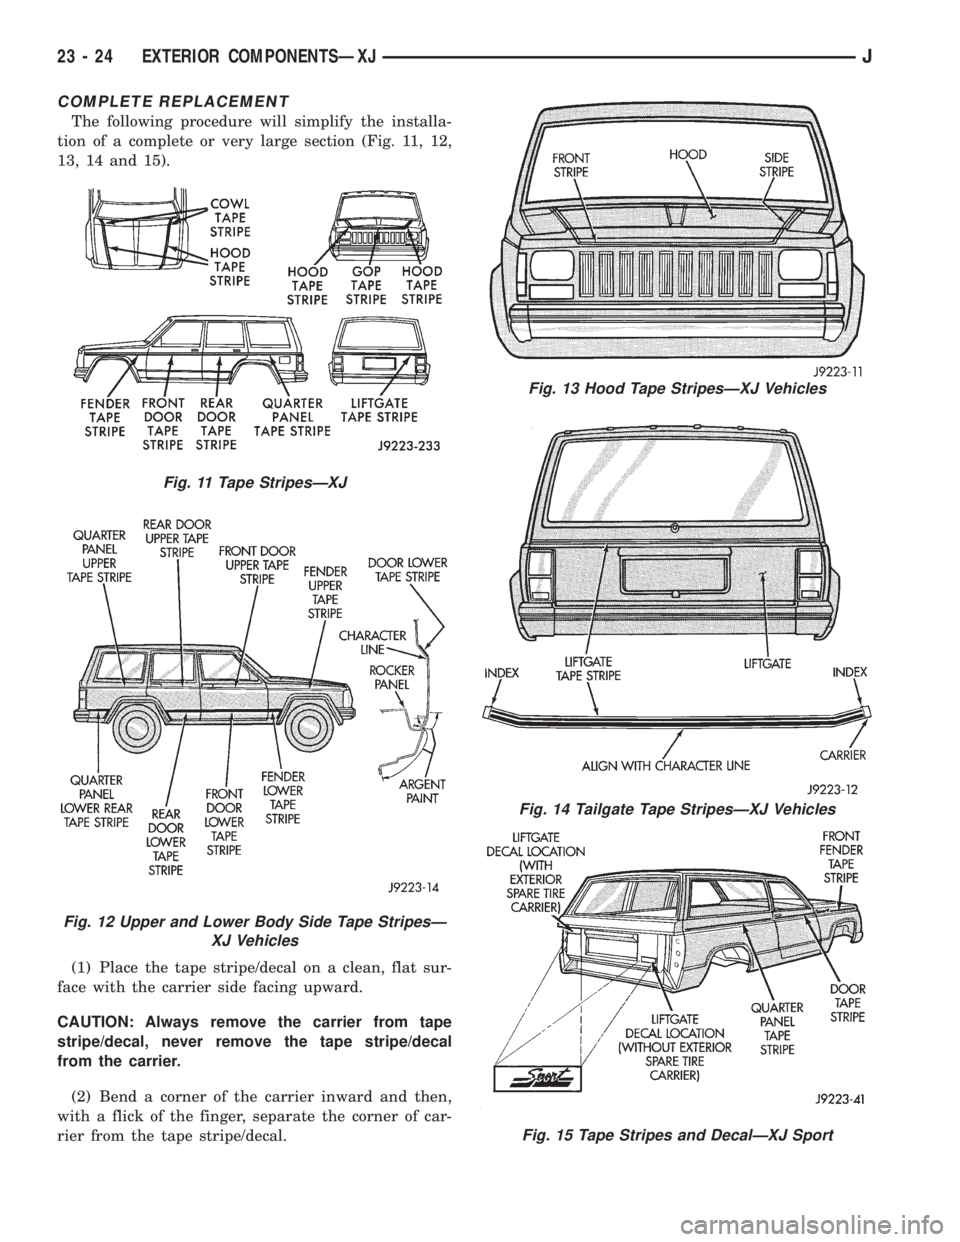 JEEP WRANGLER 1995  Owners Manual Fig. 12 Upper and Lower Body Side Tape StripesÐ
XJ Vehicles
Fig. 13 Hood Tape StripesÐXJ Vehicles
Fig. 14 Tailgate Tape StripesÐXJ Vehicles
Fig. 15 Tape Stripes and DecalÐXJ Sport
23 - 24 EXTERIOR